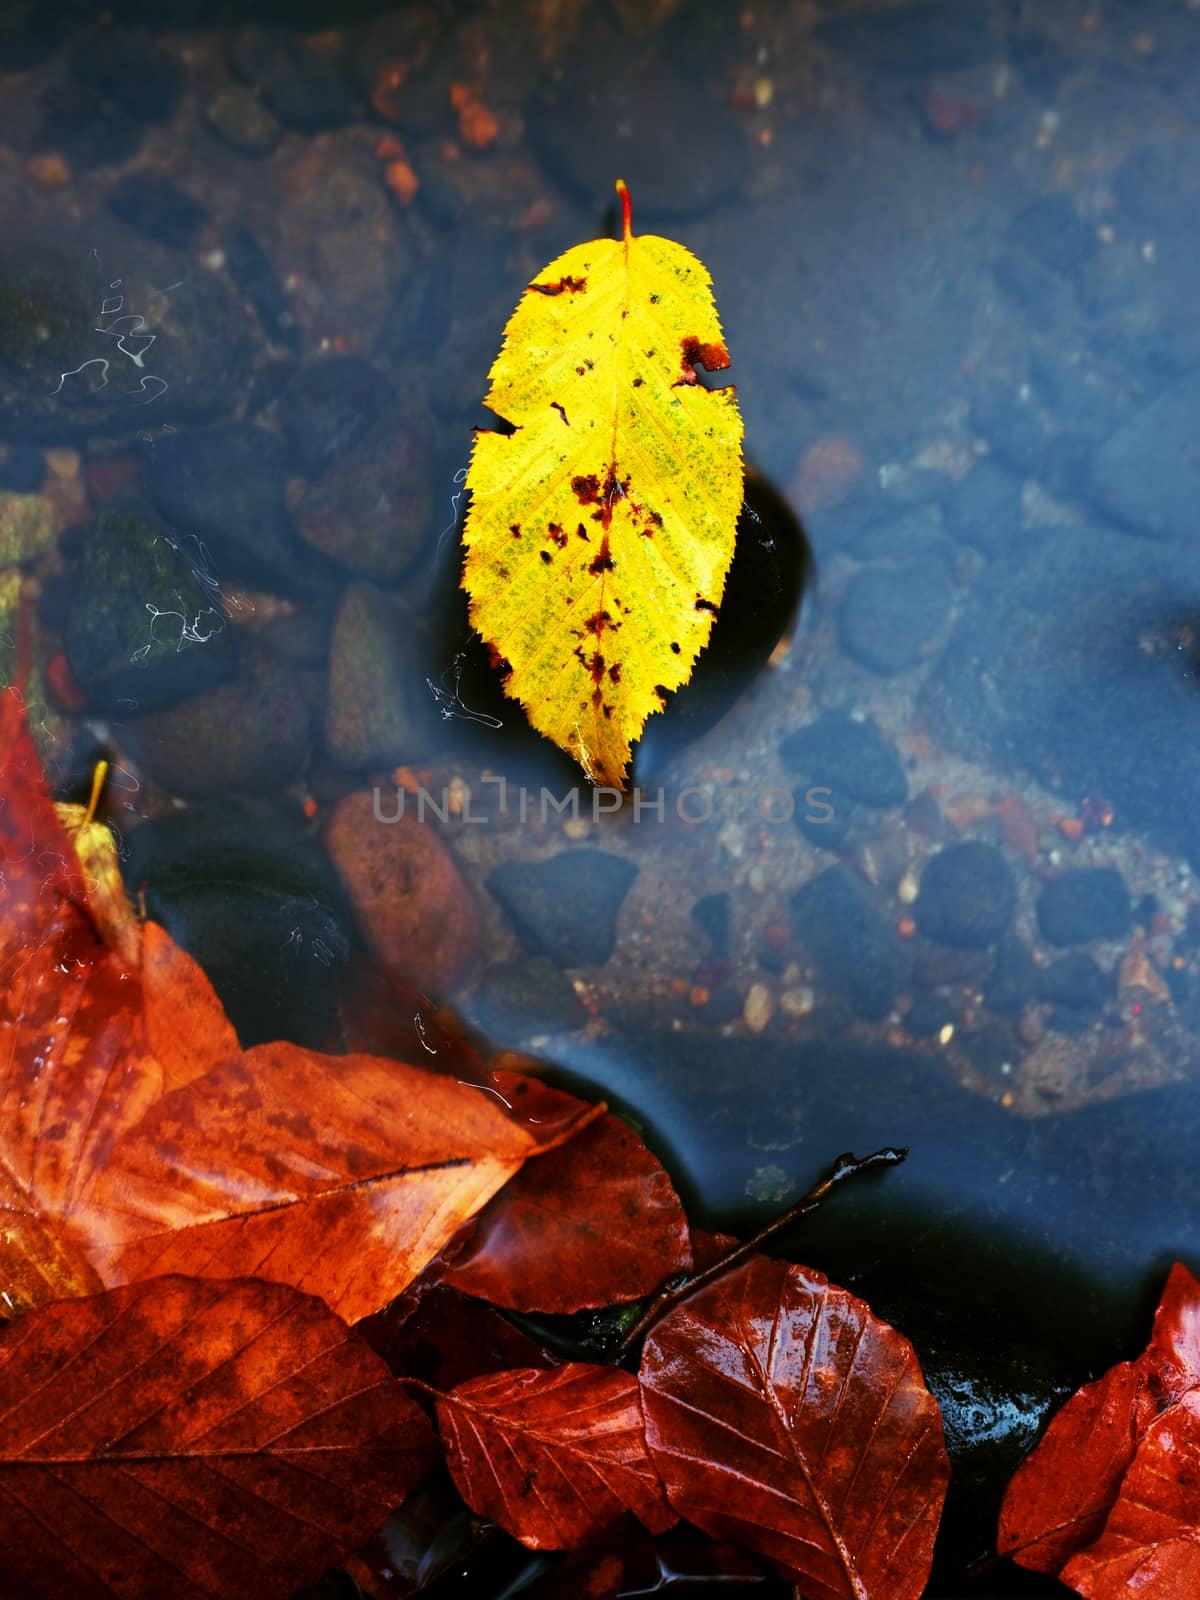 Broken beeches leaf. Mountain river with low level of water, gravel with leaves by rdonar2